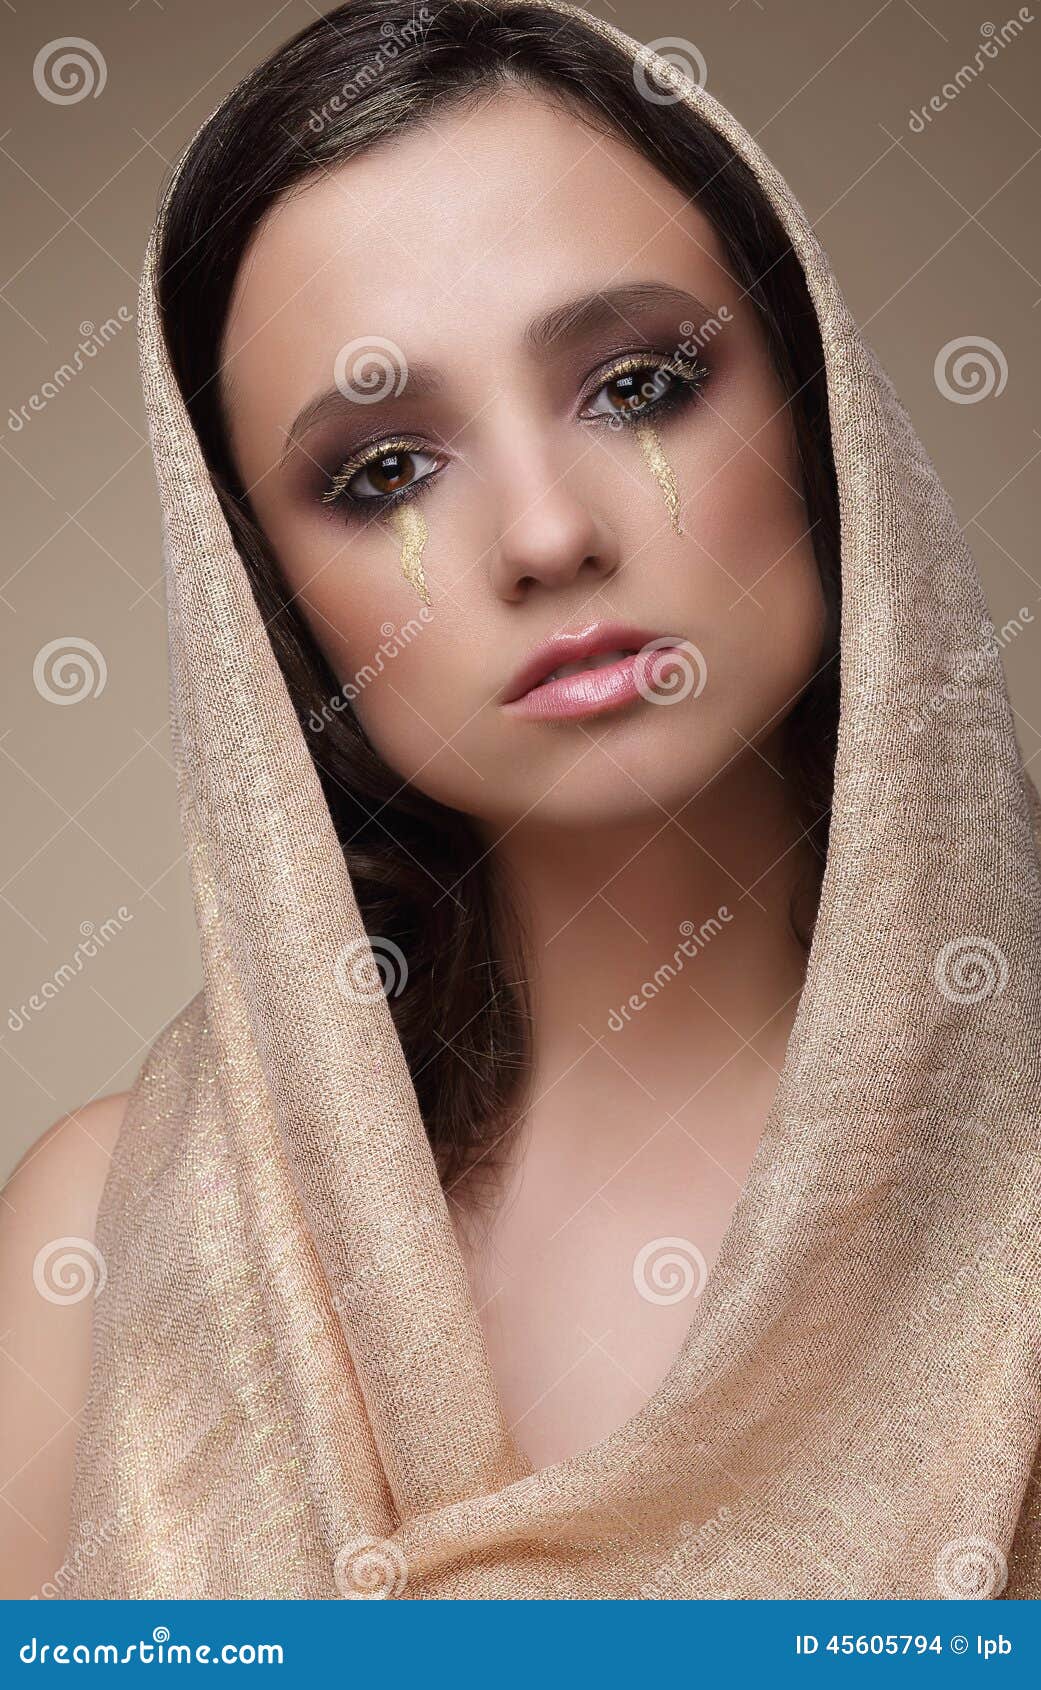 woman in shawl with dramatic stagy makeup